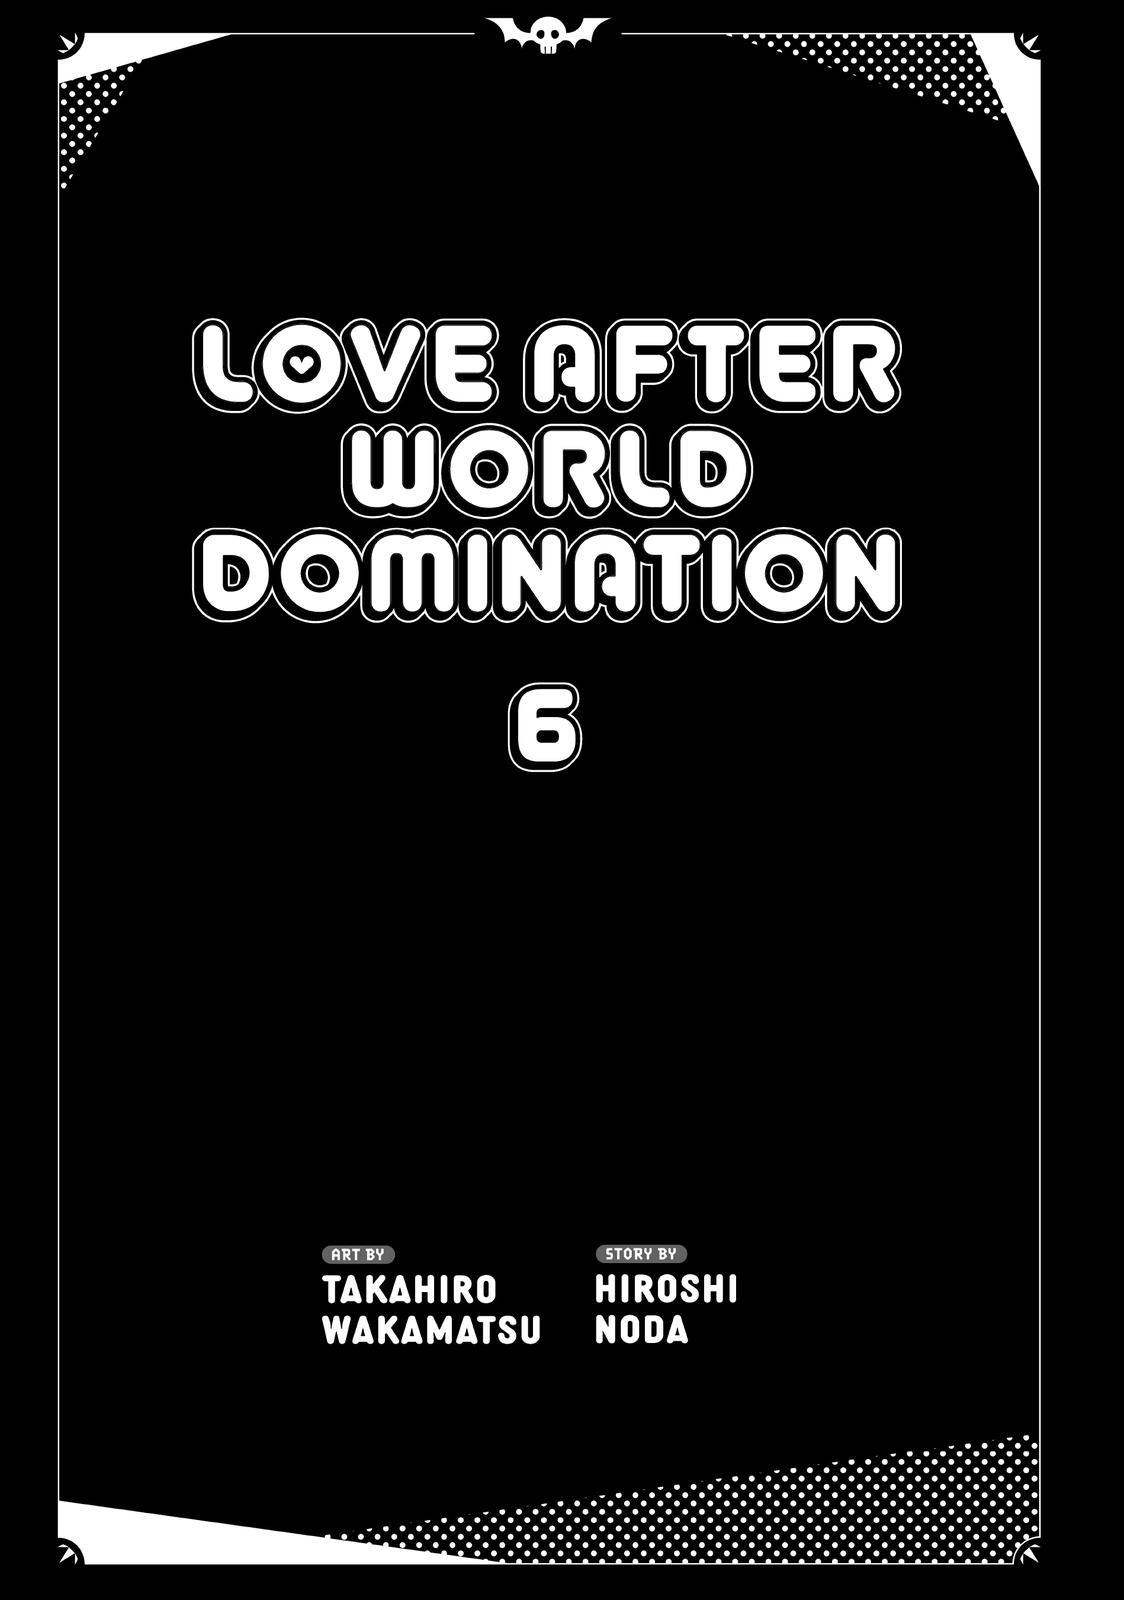 Read Love After World Domination by Hiroshi Noda Free On